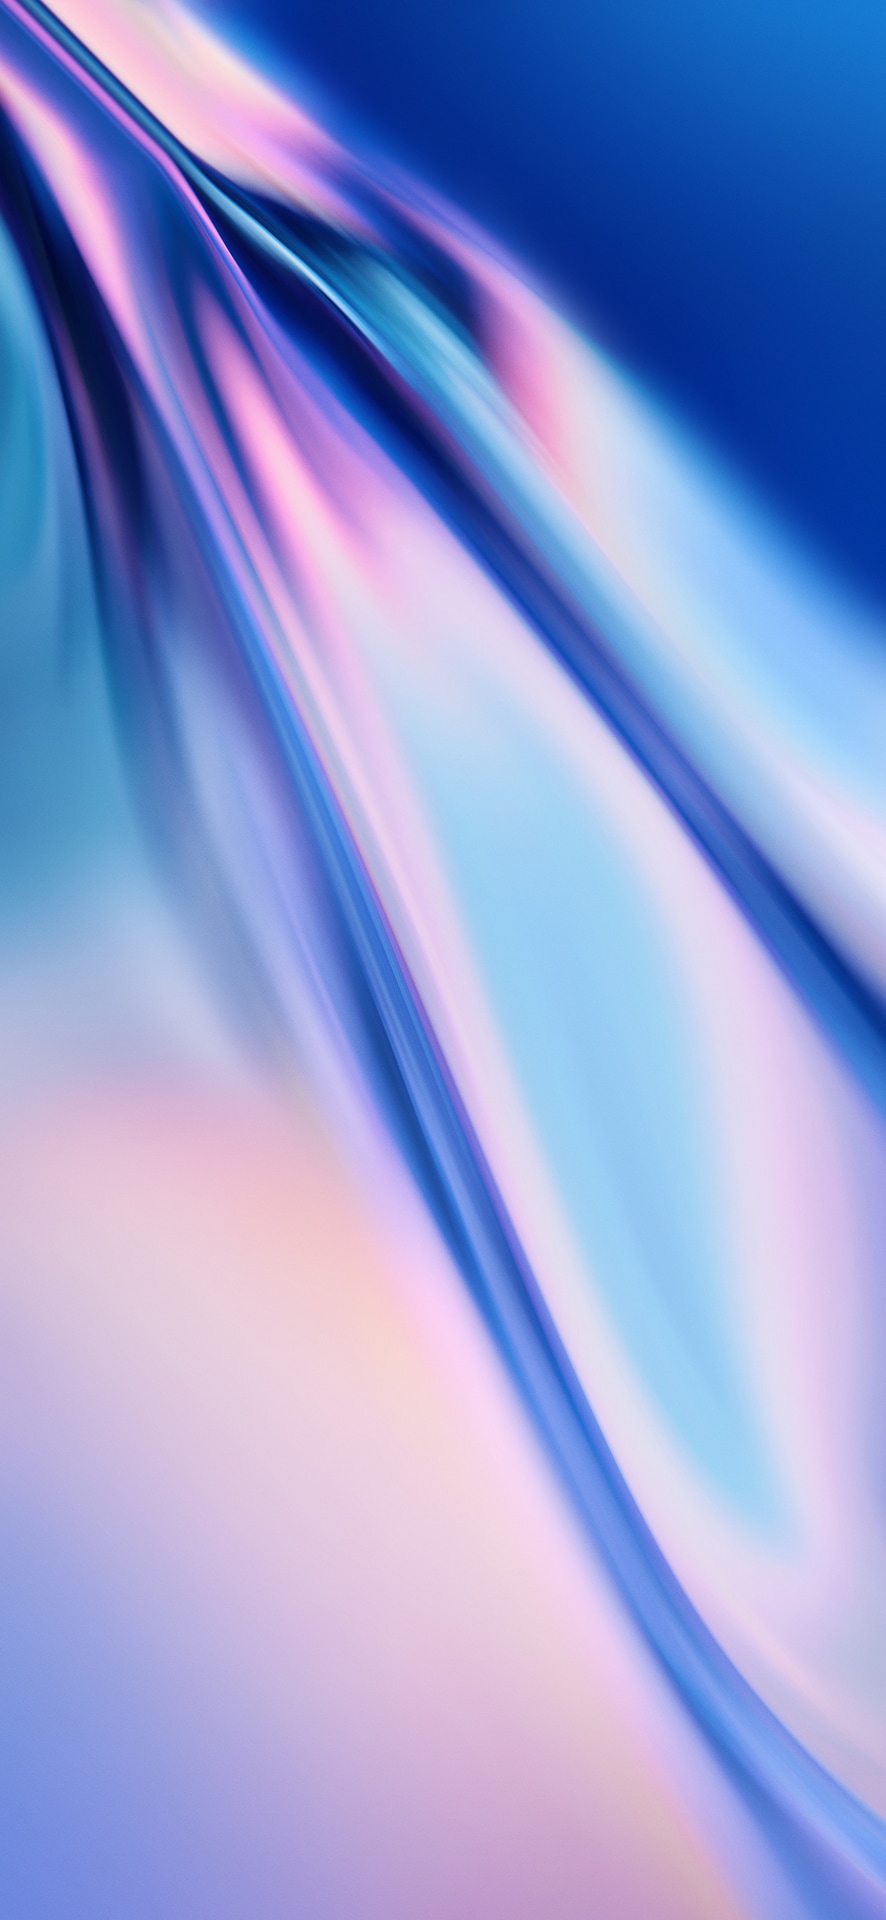 Download the OnePlus 7 Pro wallpapers here - Android Authority